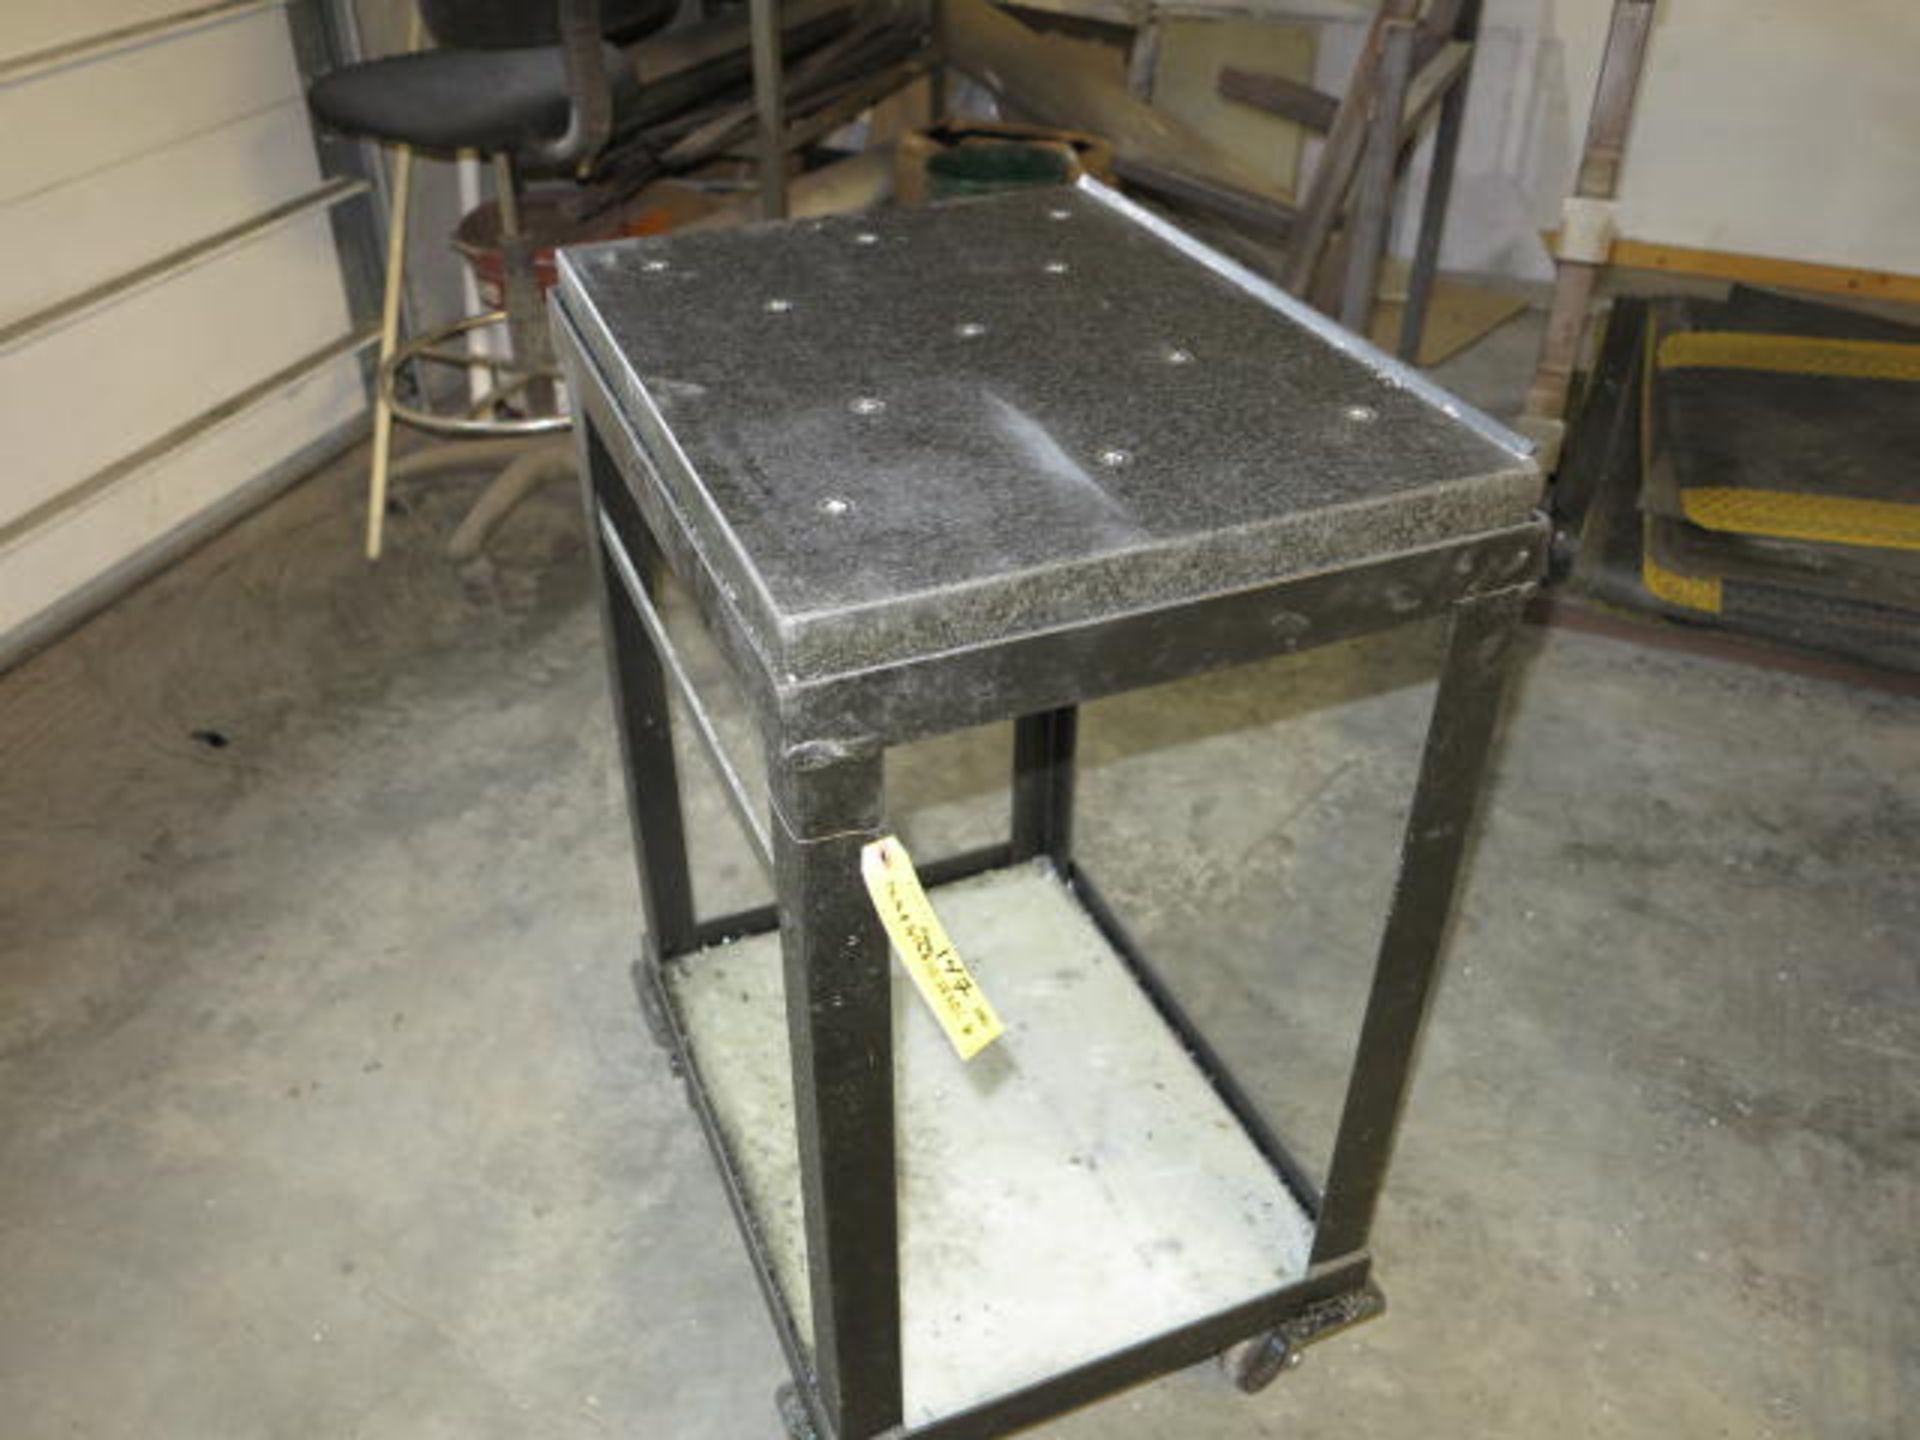 Set Up Cart with 24 x 18 x 3 Granite Surface Plate Location: Elmco Tool 3 Peter Rd Bristol, RI